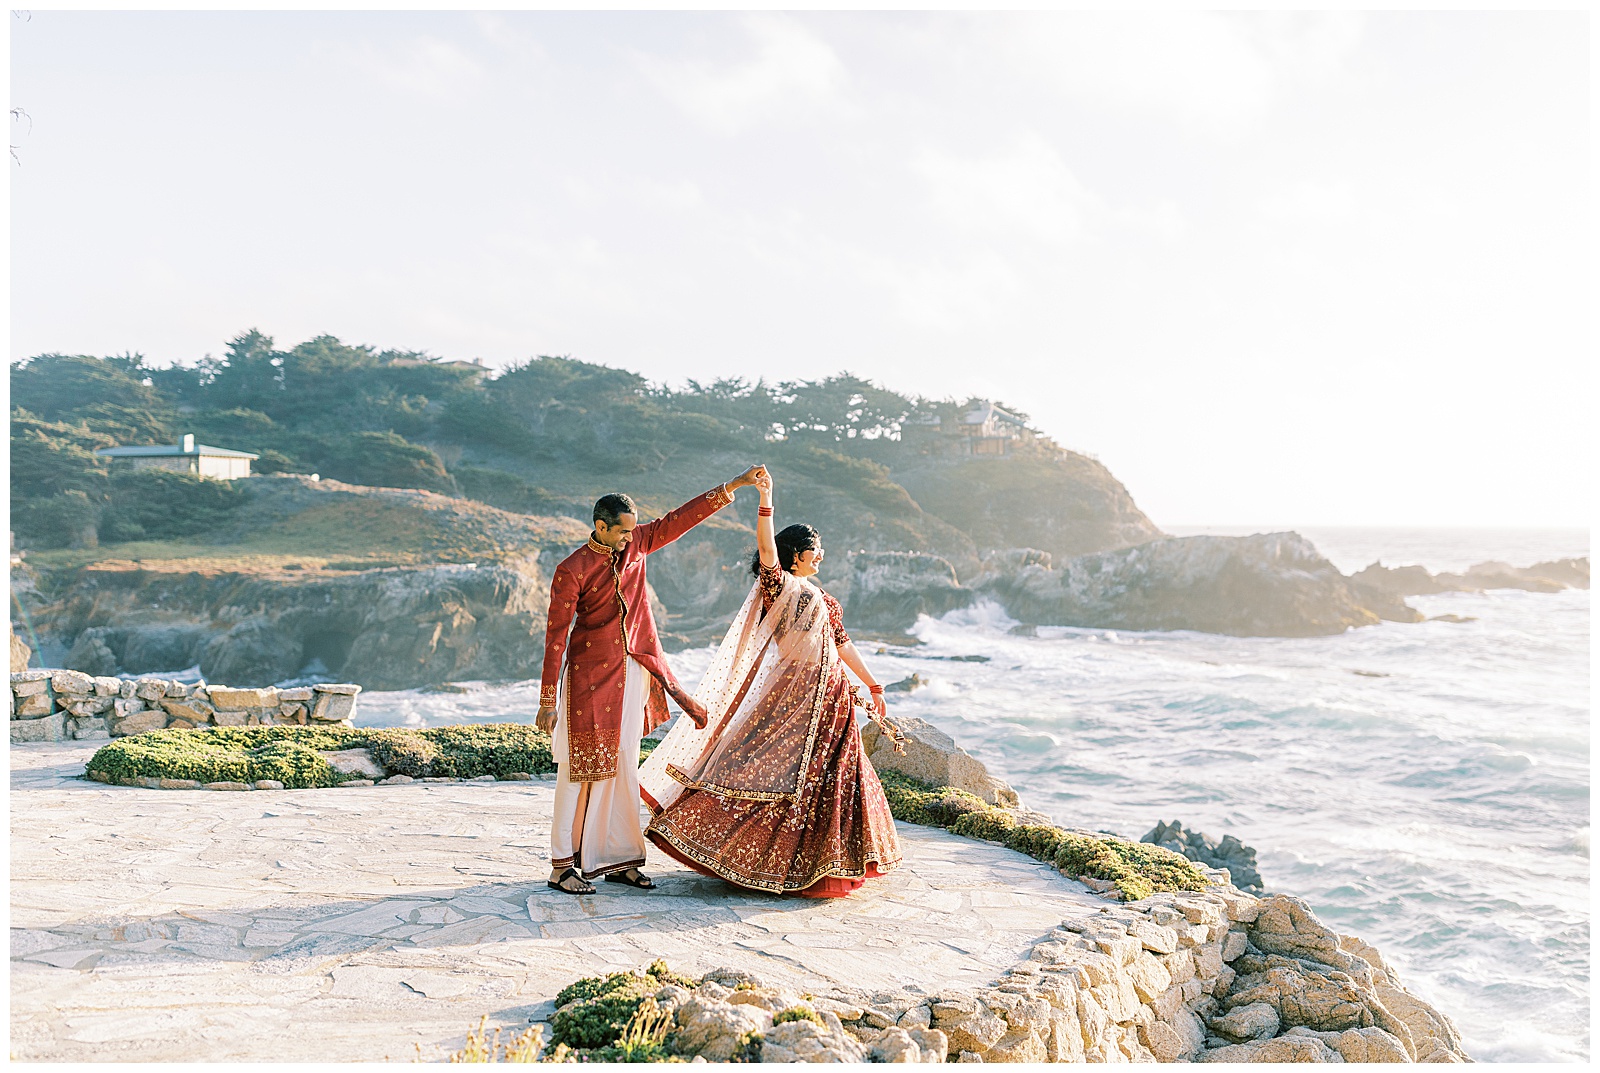 bride and groom in traditional indian wedding attire dancing on cliff by the ocean in carmel-by-the-sea california fresno wedding photographer megan helm photography